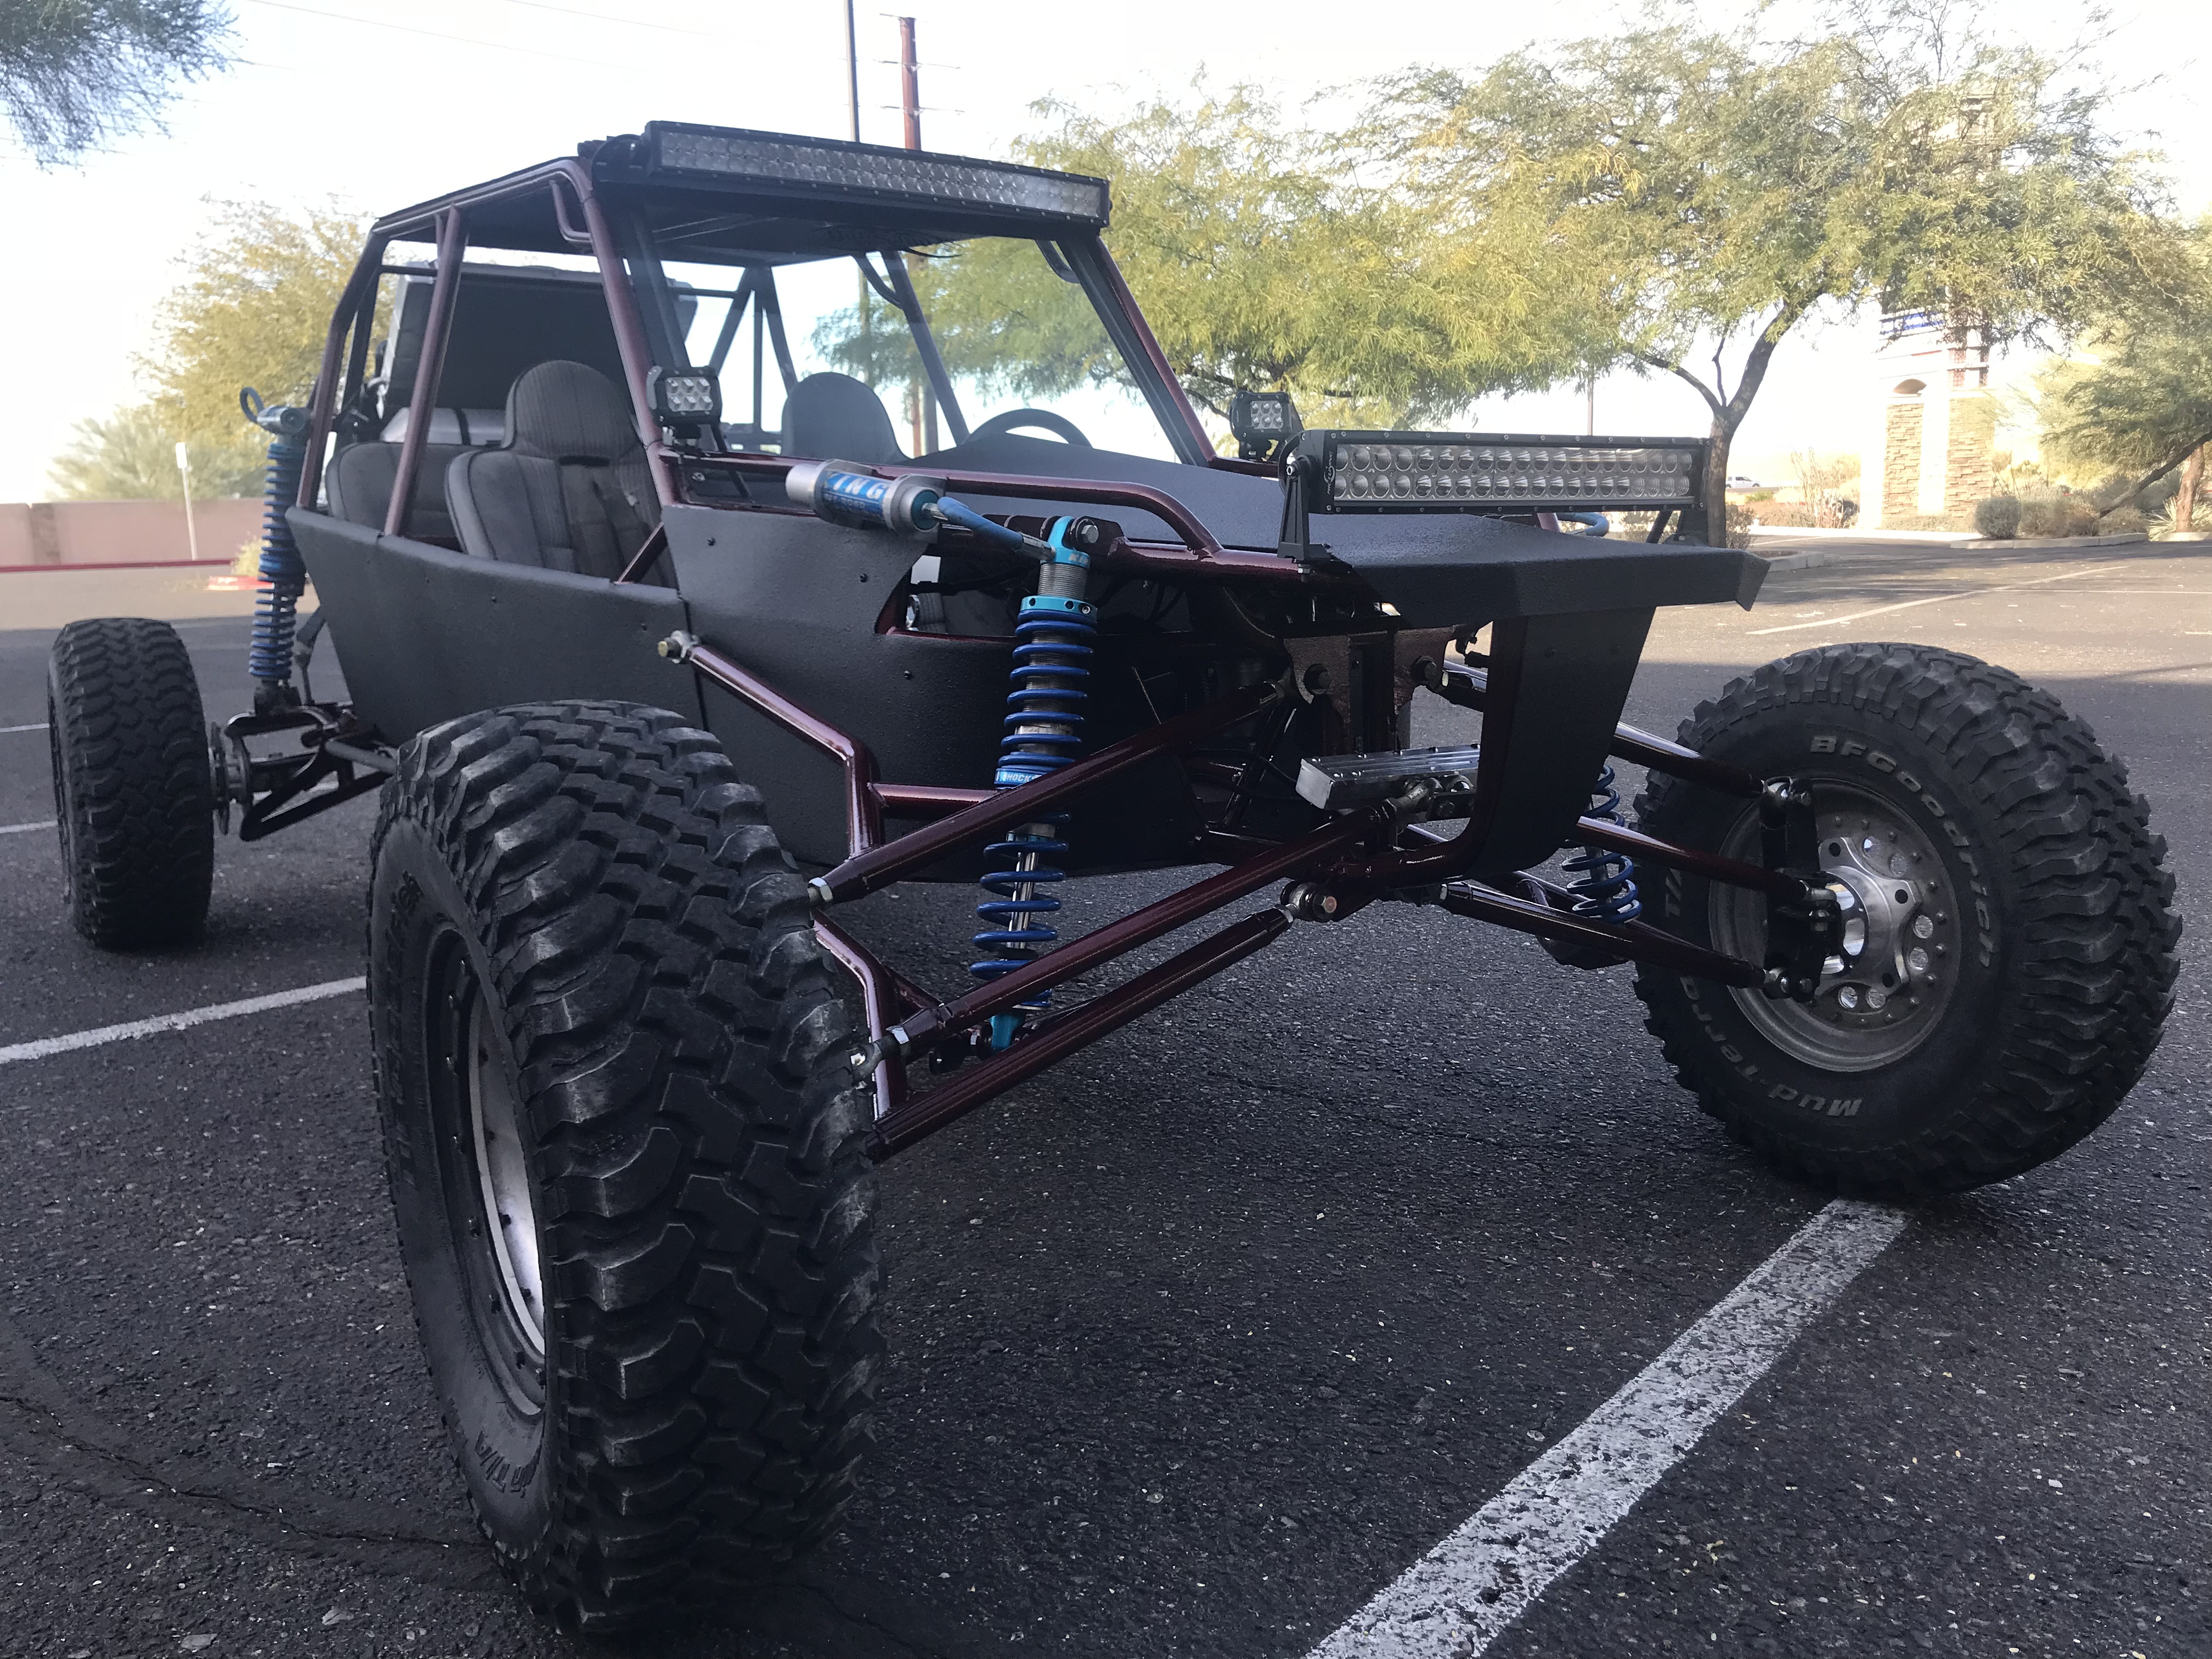 dune buggy 4 seater street legal